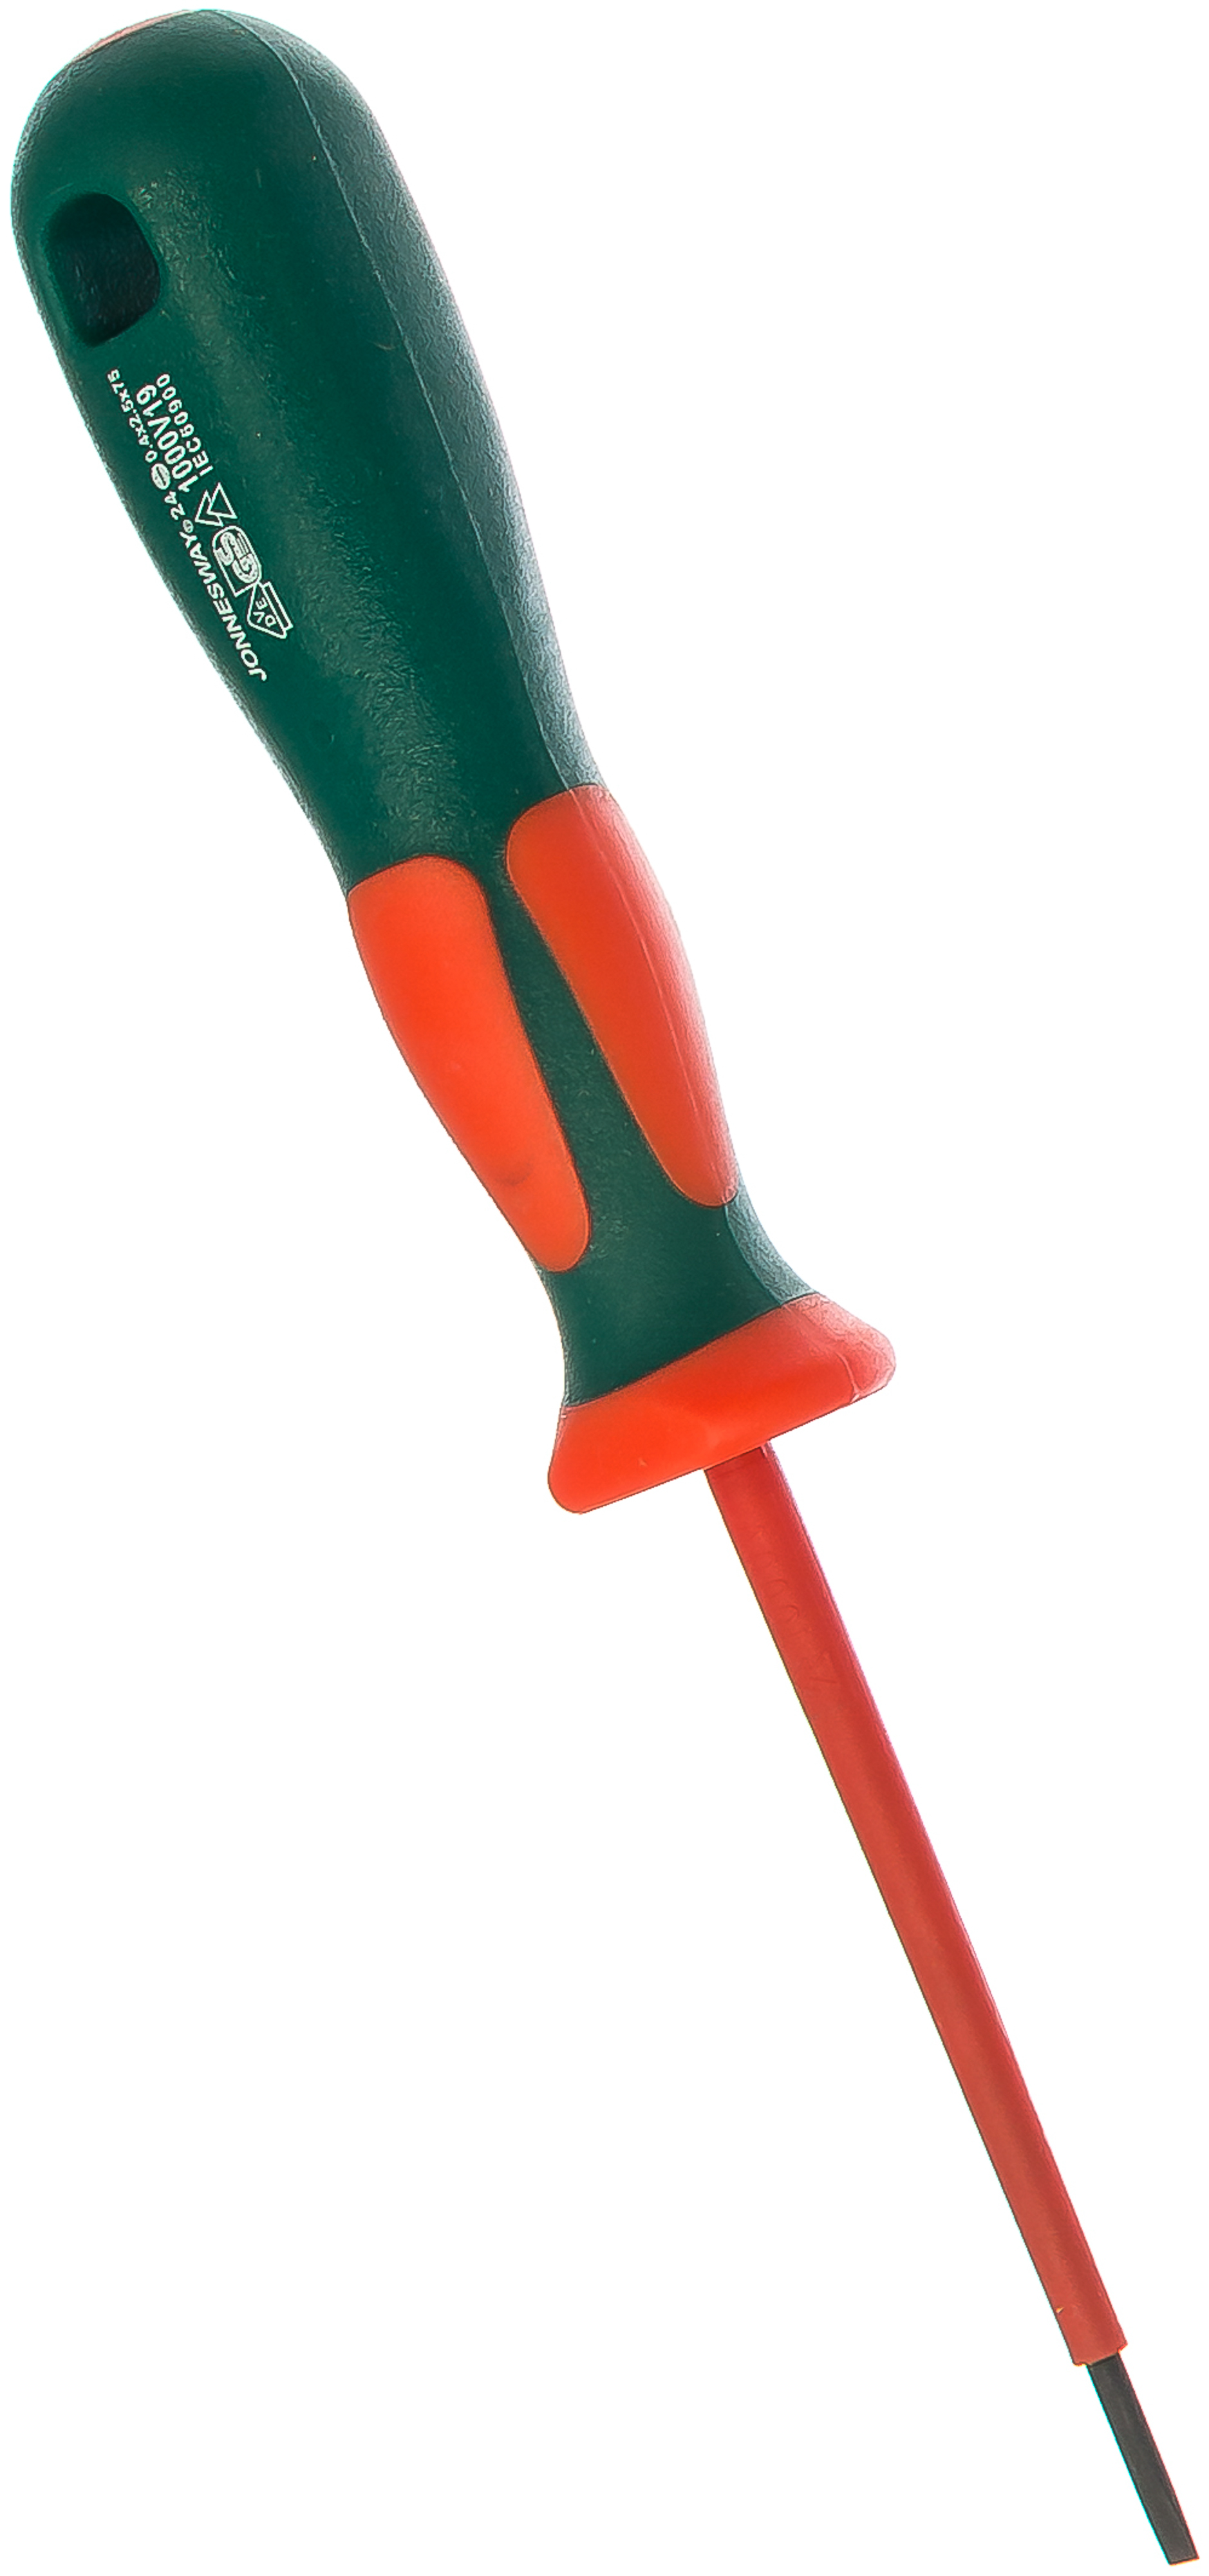 1000V INSULATED SCREWDRIVERS GS&VDE APPROVED 6.5X150MM DV13S6150 - Click Image to Close